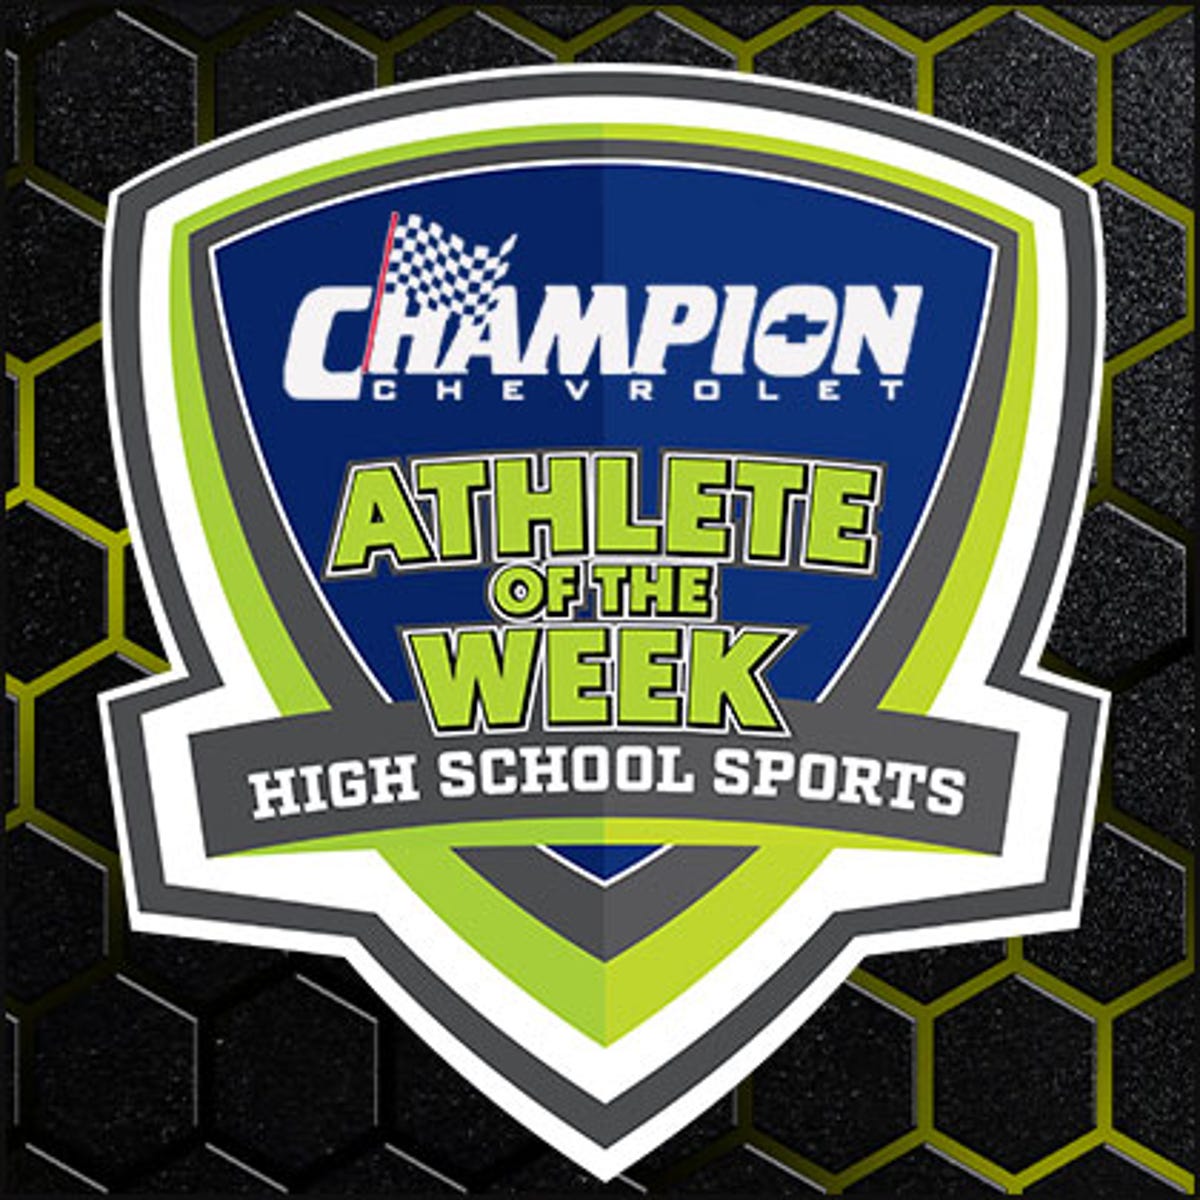 Galena lacrosse player Ava Wulforst wins Champion Chevrolet Athlete of the Week poll